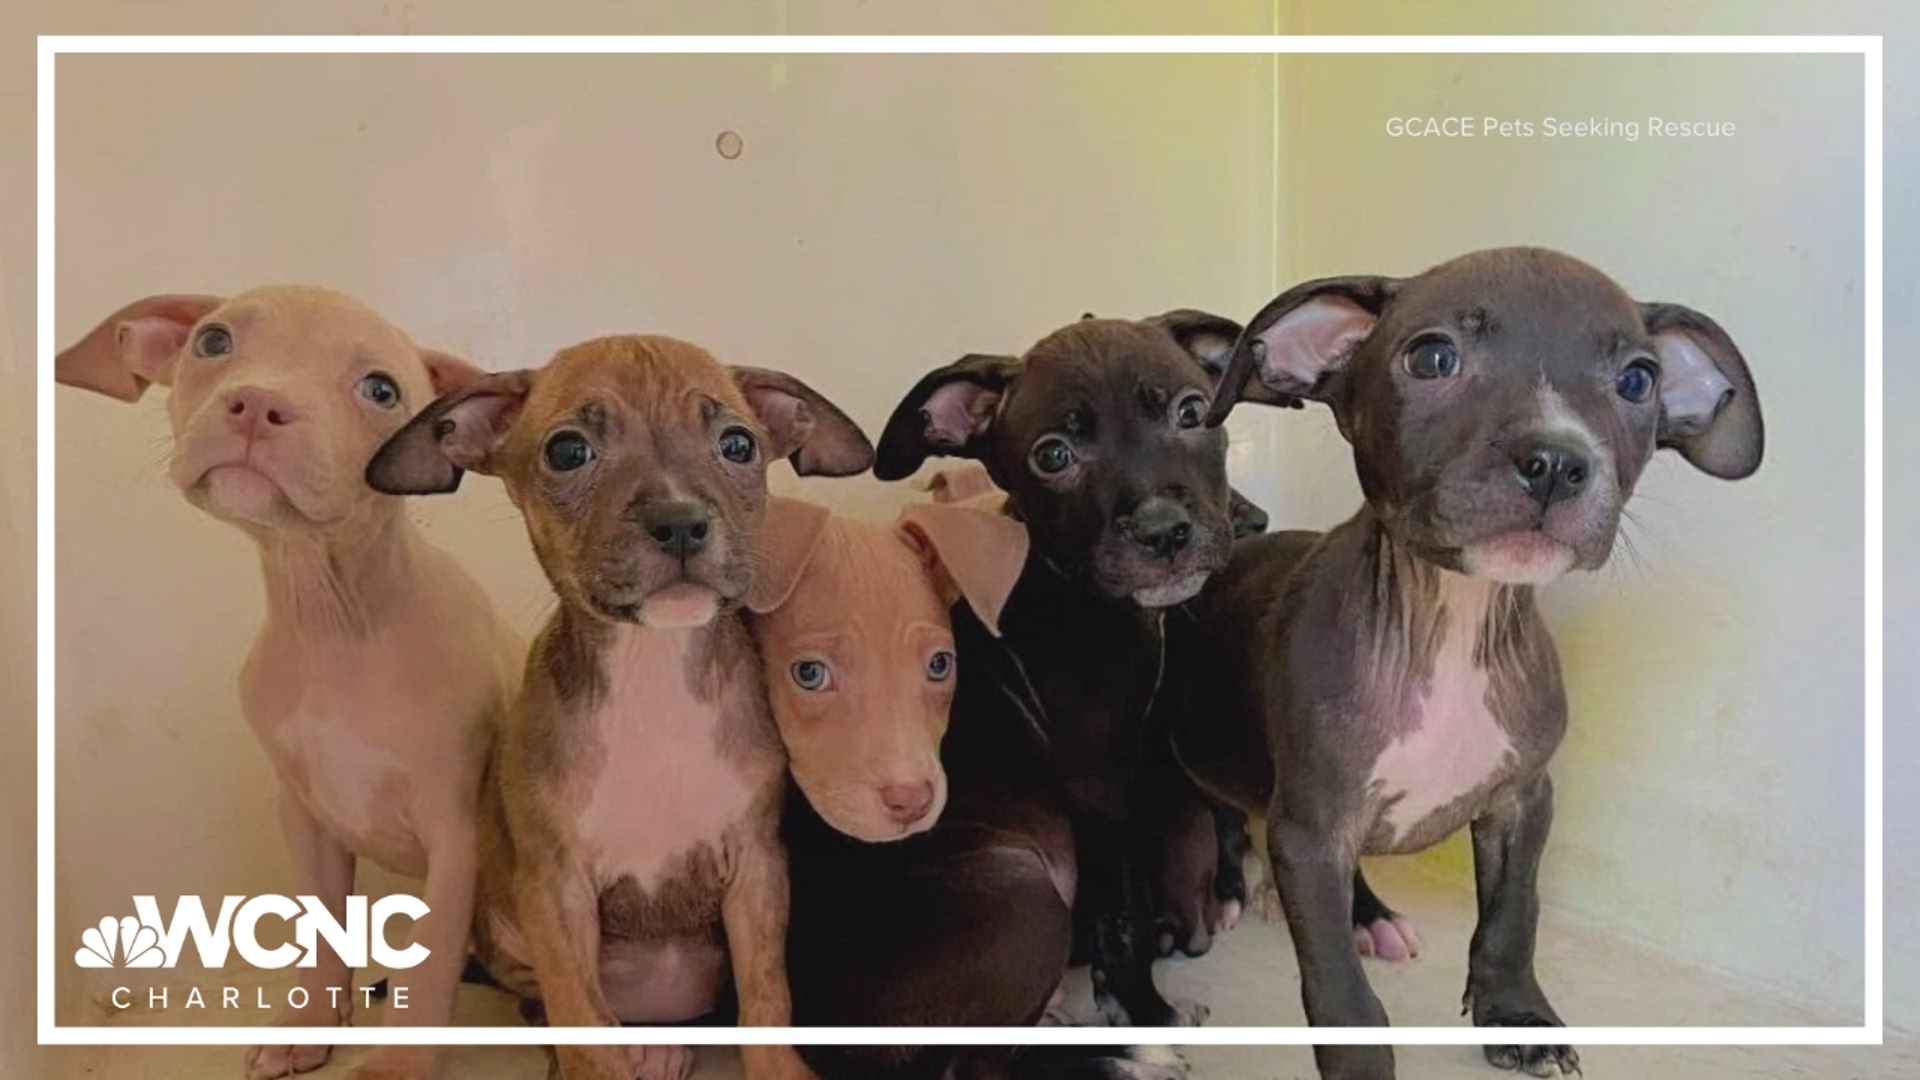 The animal shelter needs help sheltering eight puppies that were recently found, all having had their first vaccines and flea medicine.